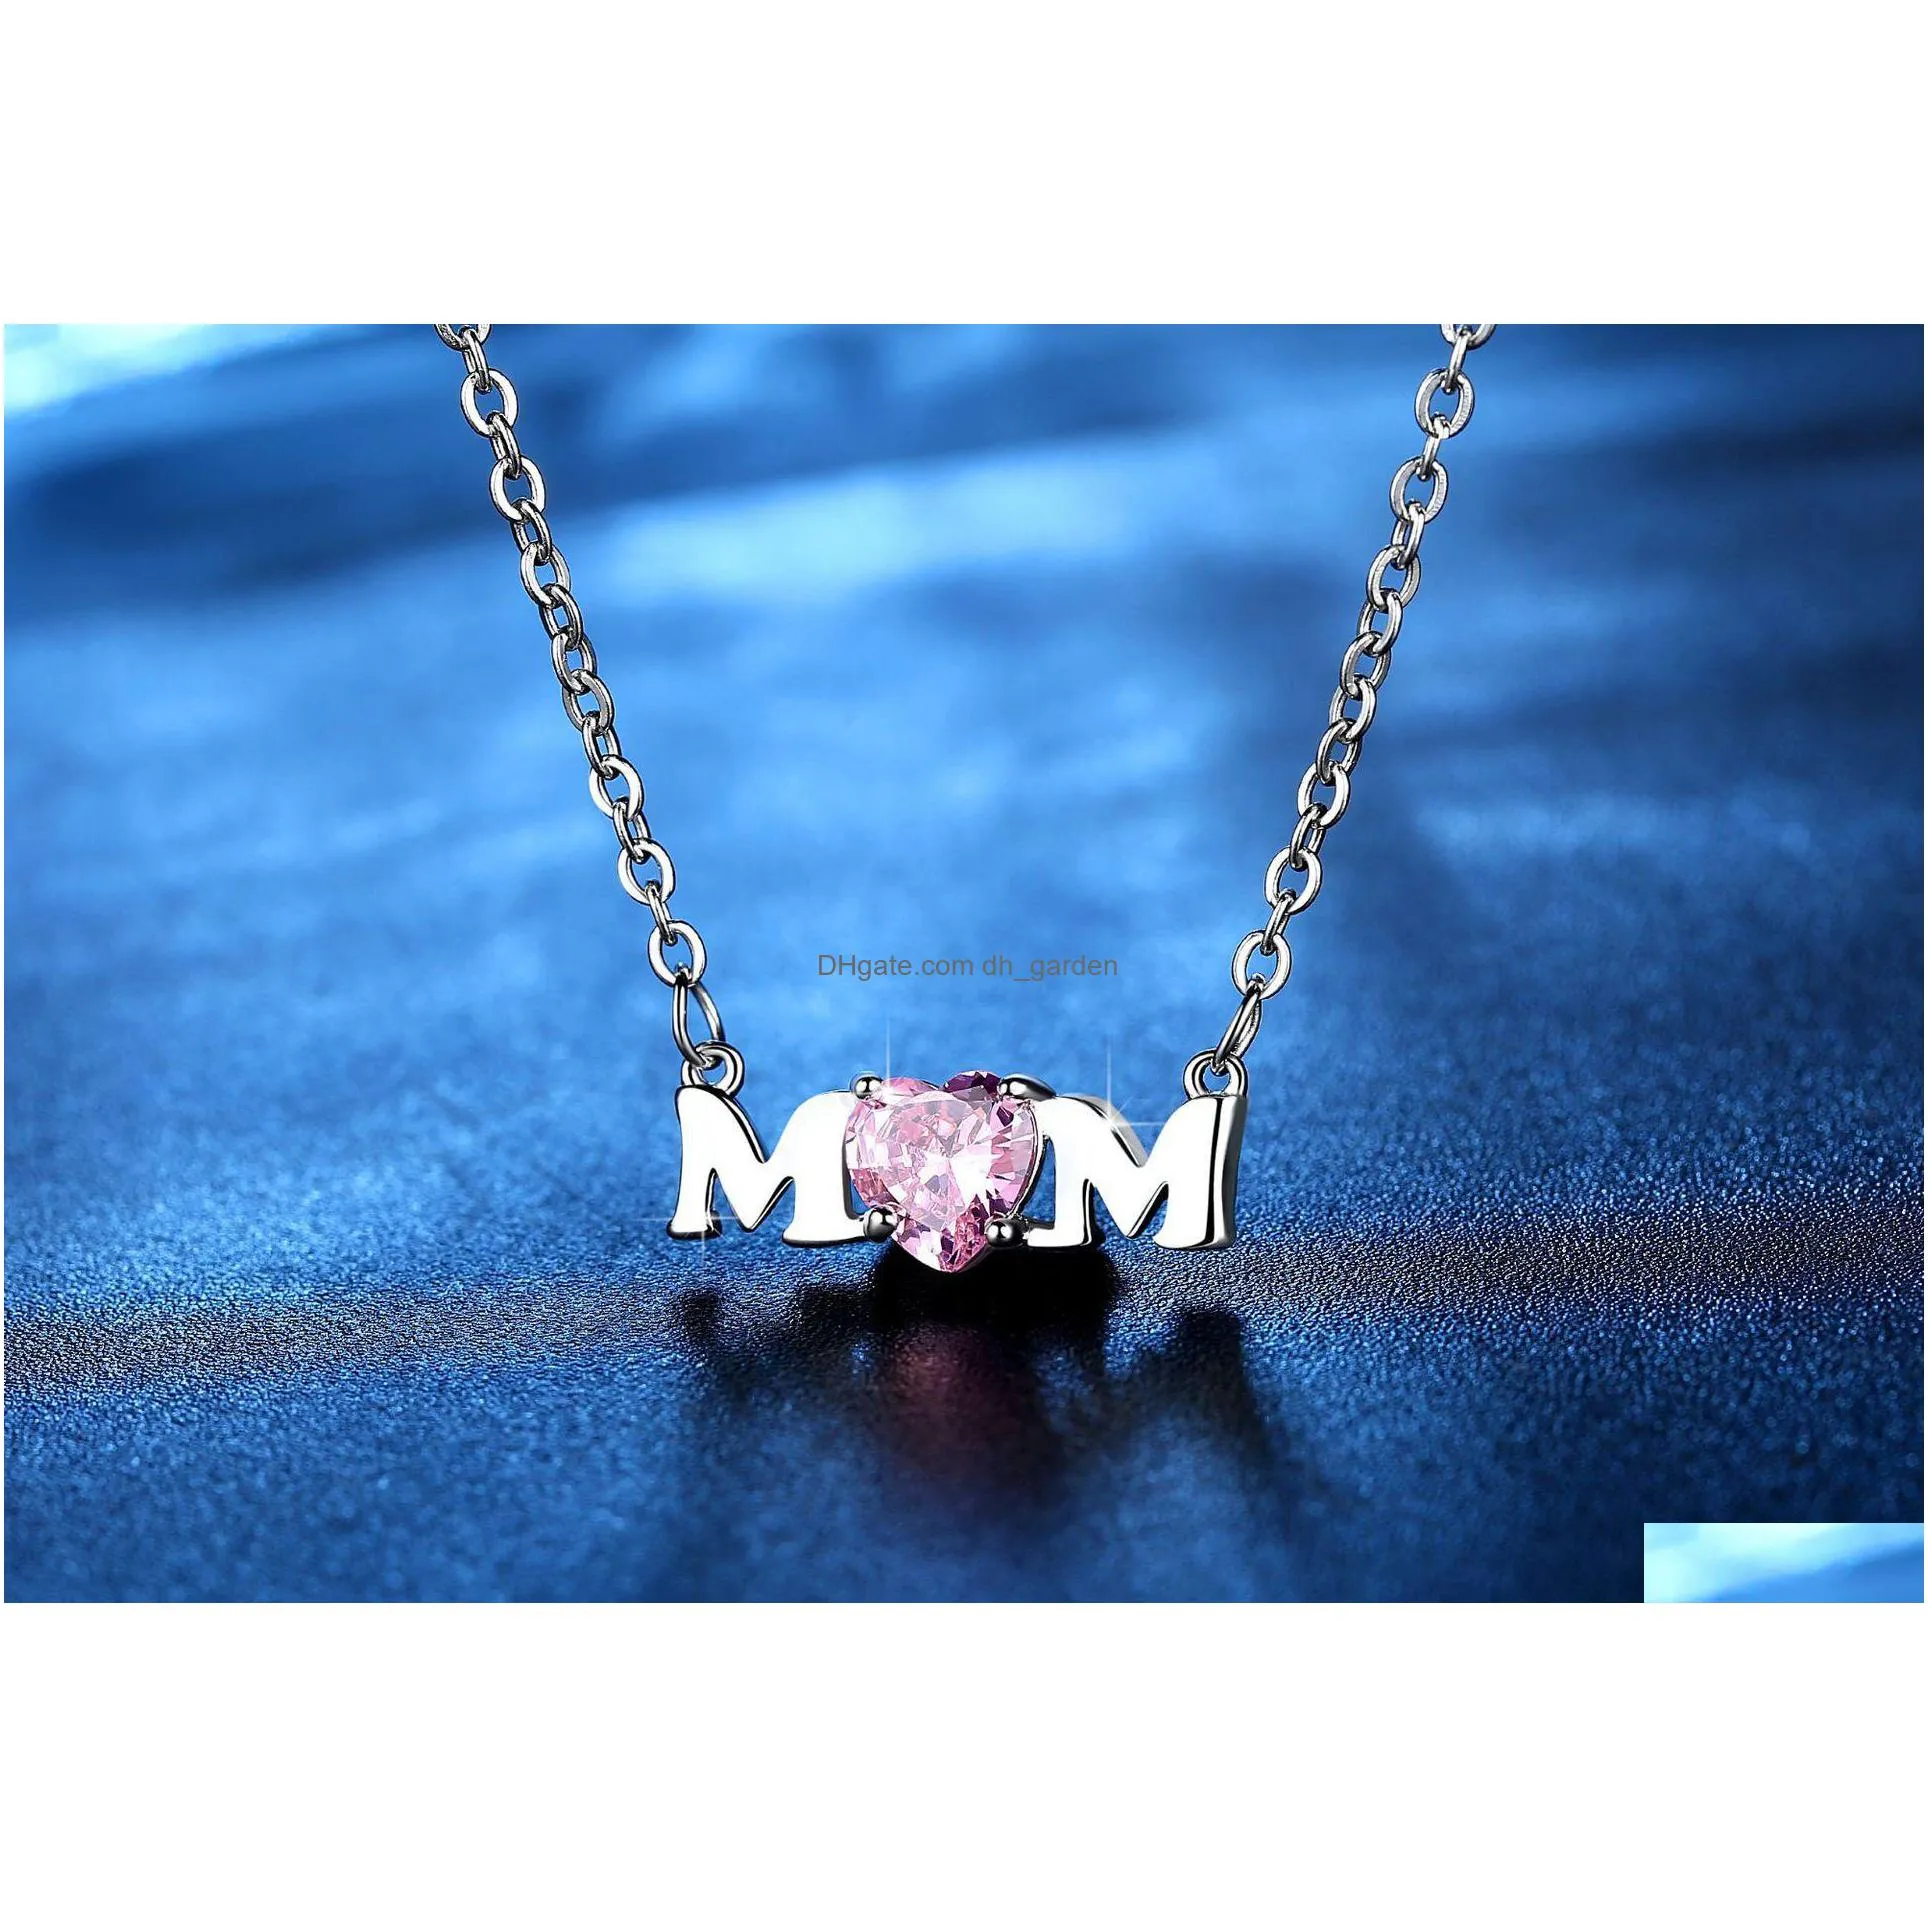 wholesale mom mothers day necklace pink heart shaped zircon letter necklace pendant mother clavicle chain gift jewelry shipping